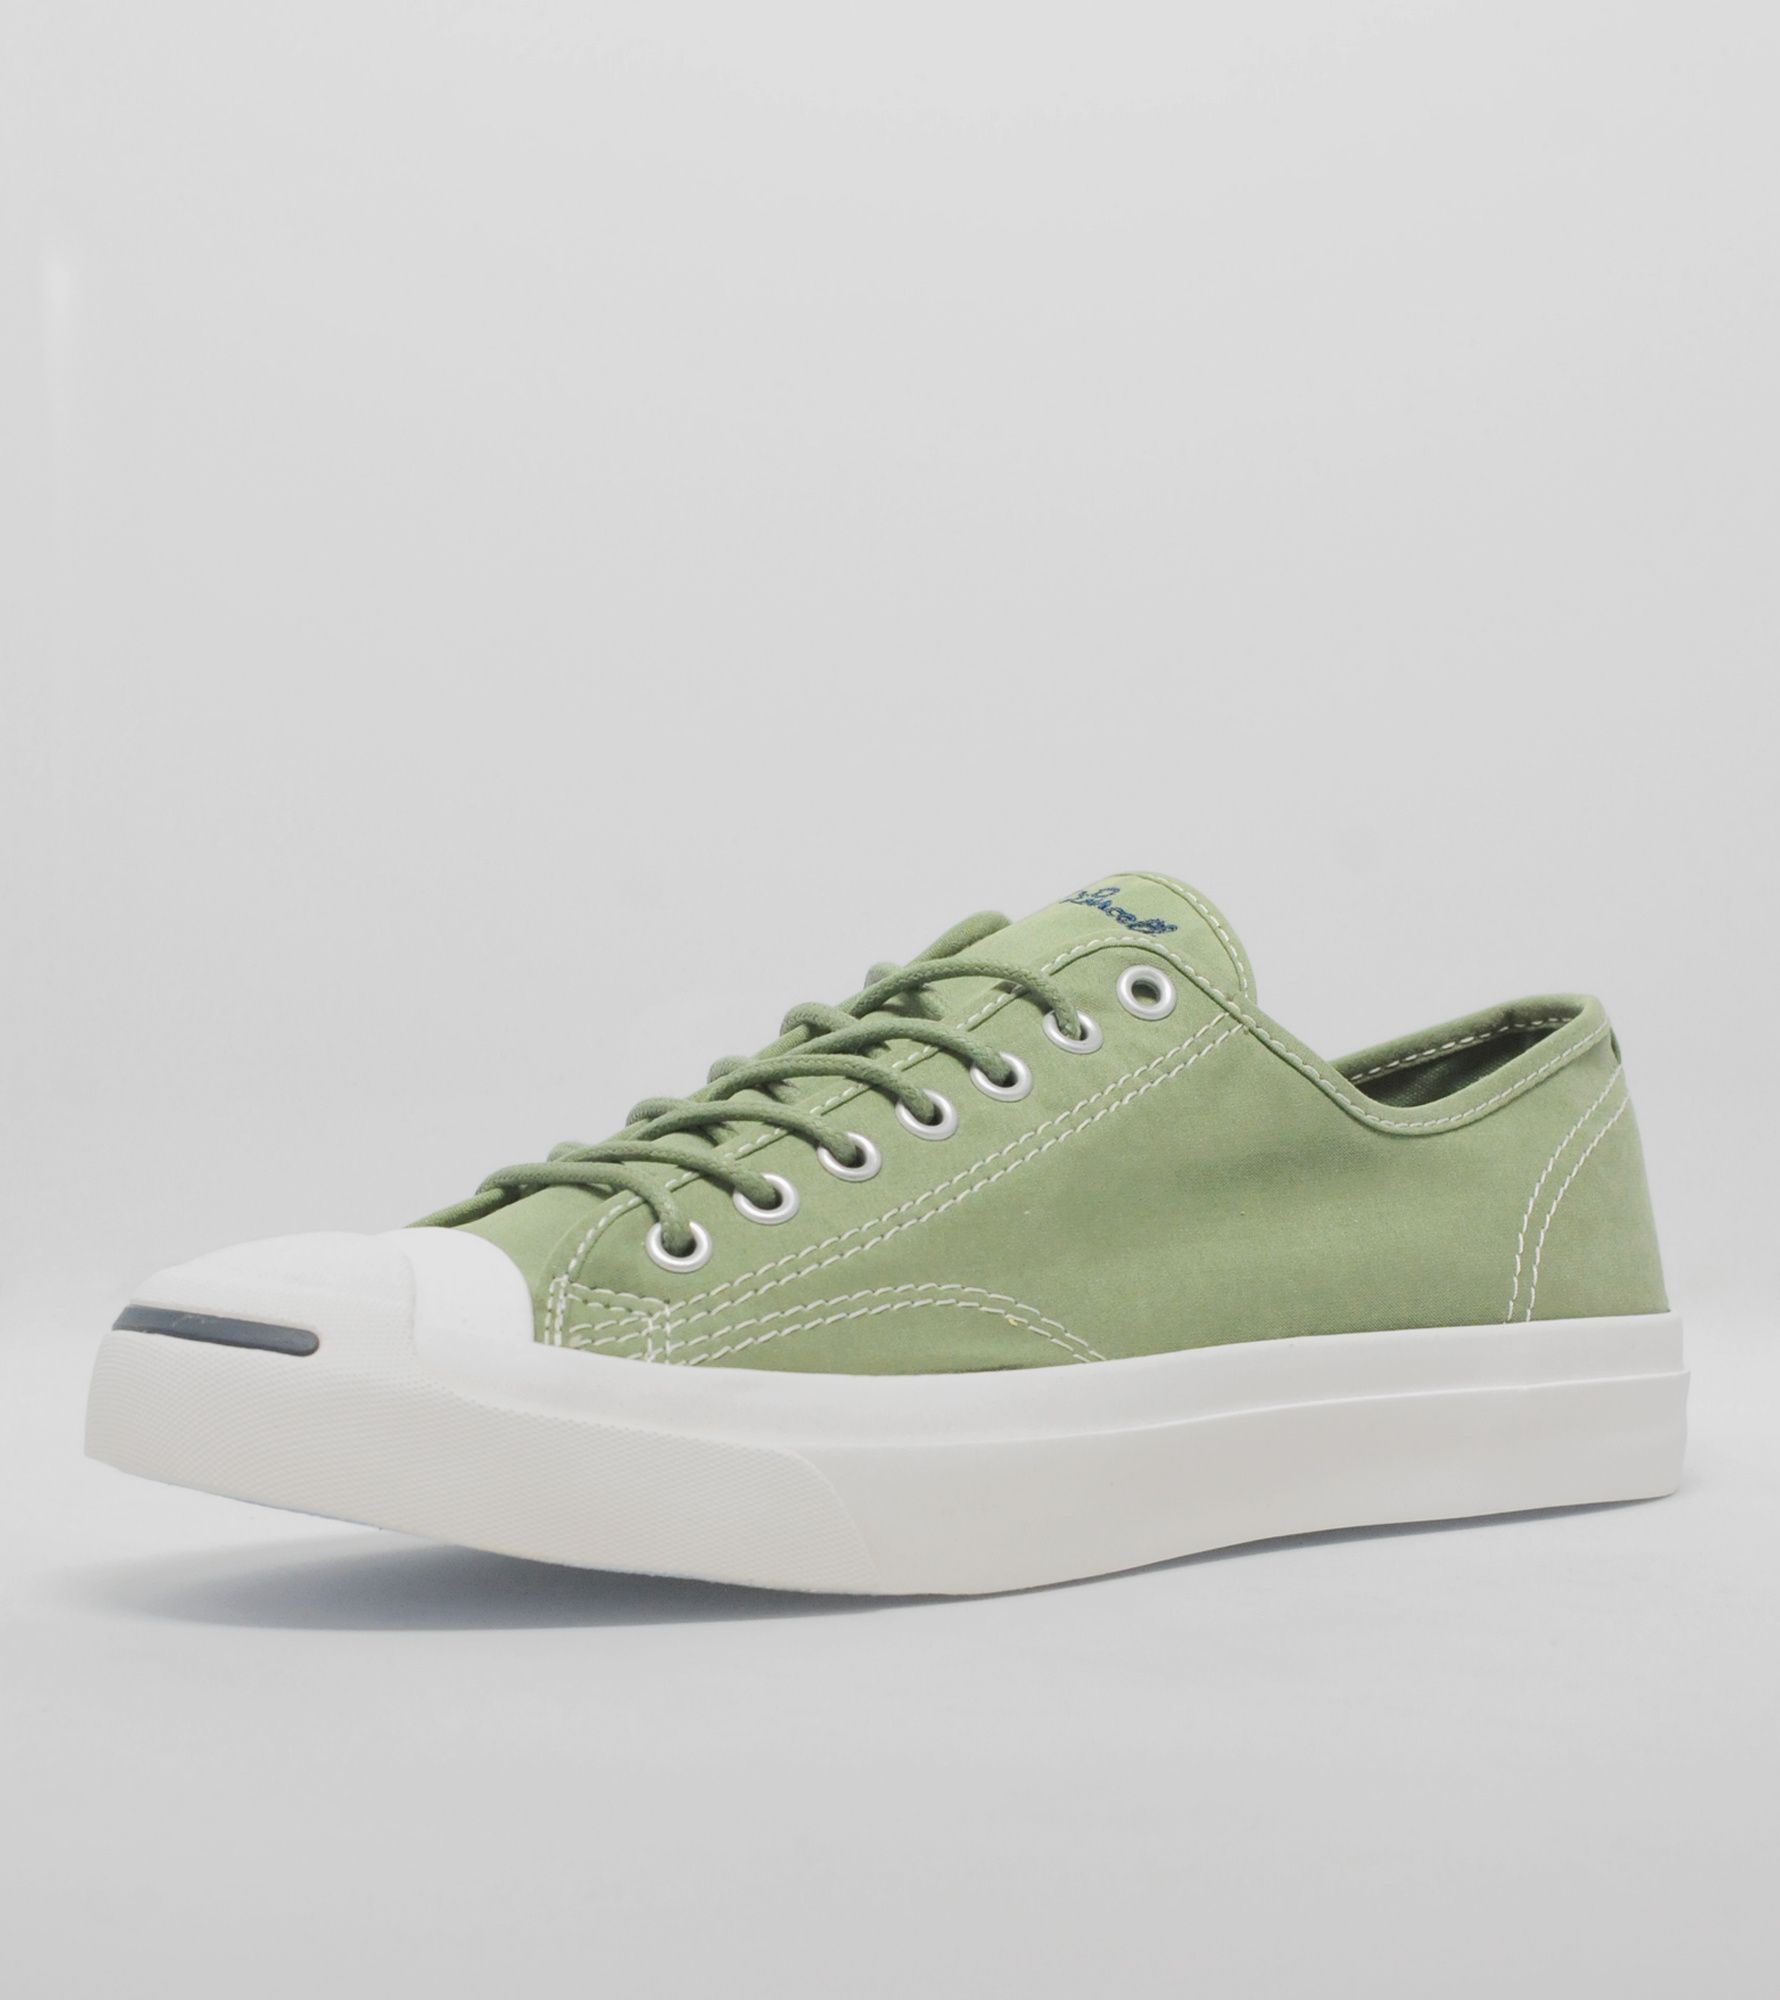 Converse Jack Purcell Ox | Size?